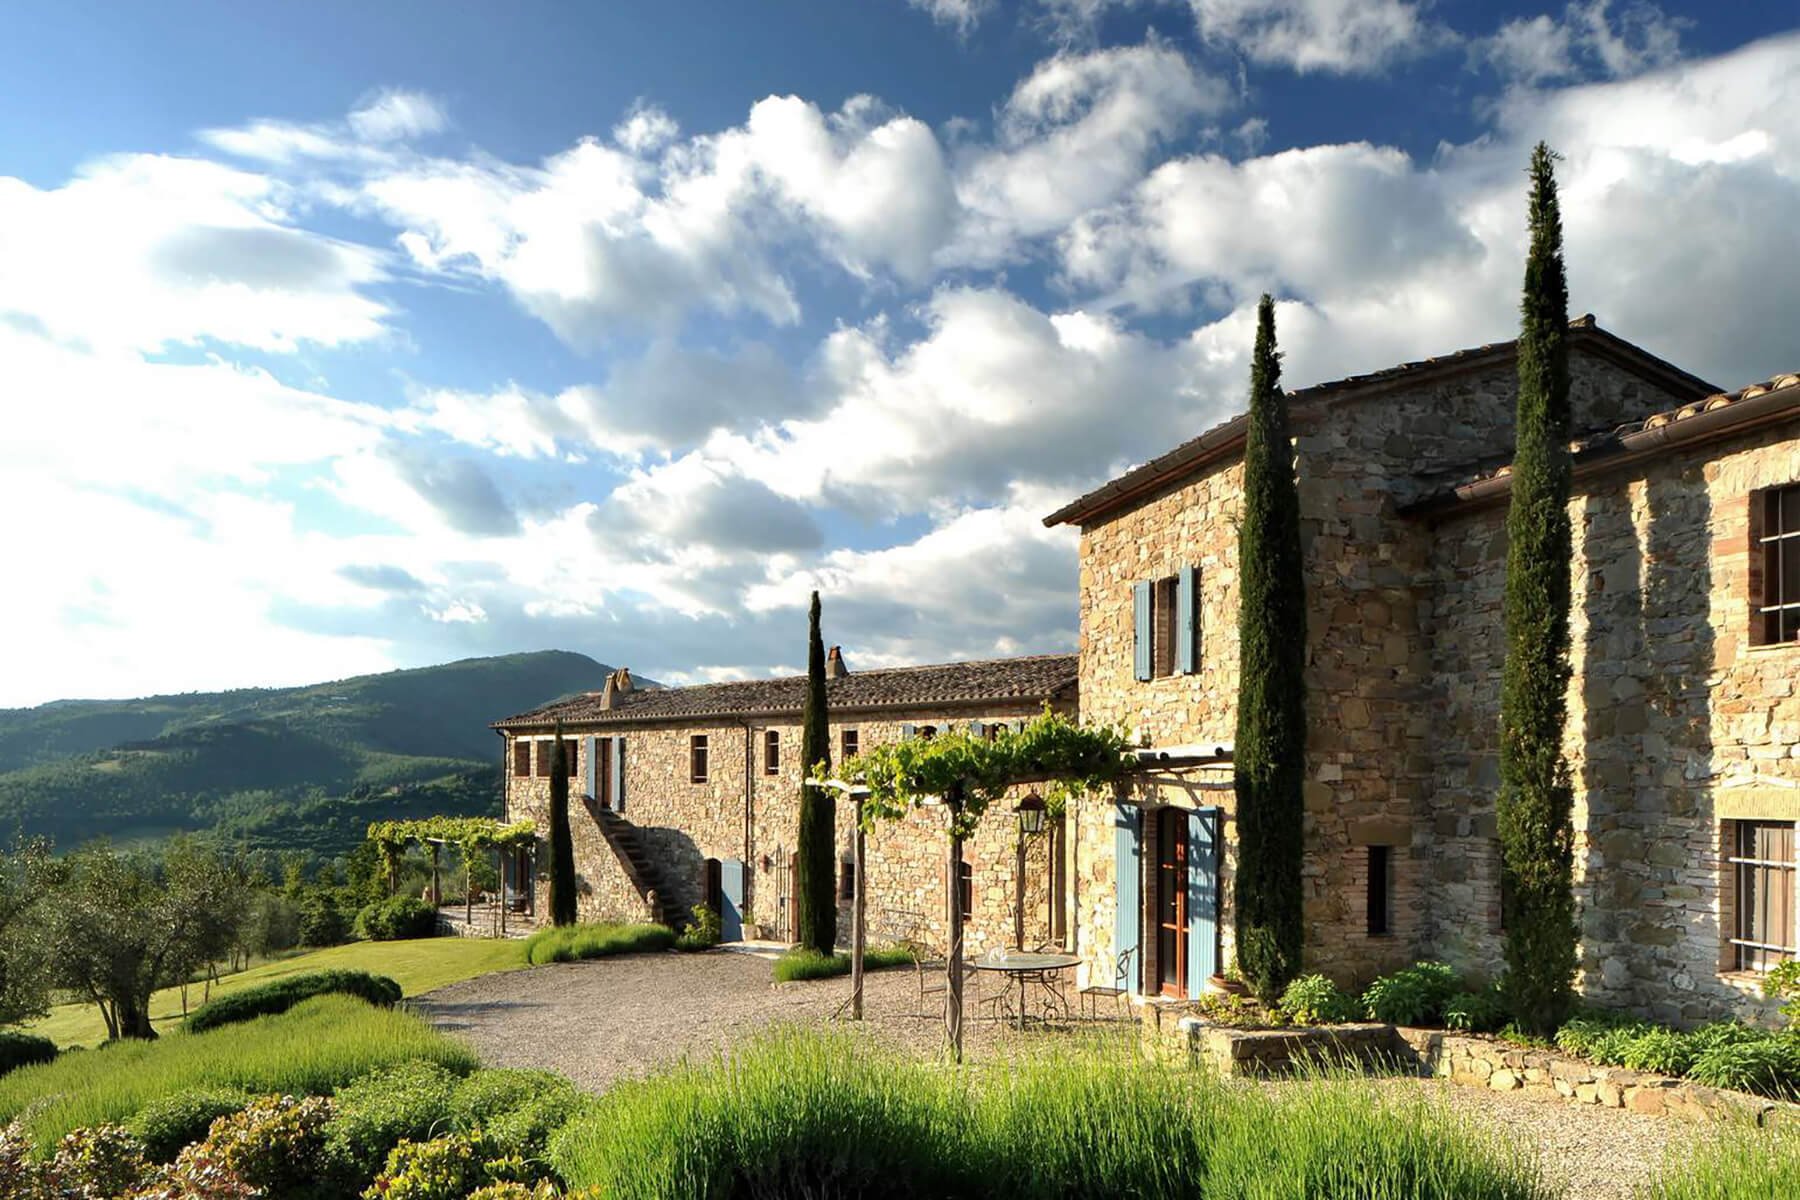 Francis York This Boutique Farmhouse in the Umbrian Hills is Available as a Luxury Villa Rental 1.jpg